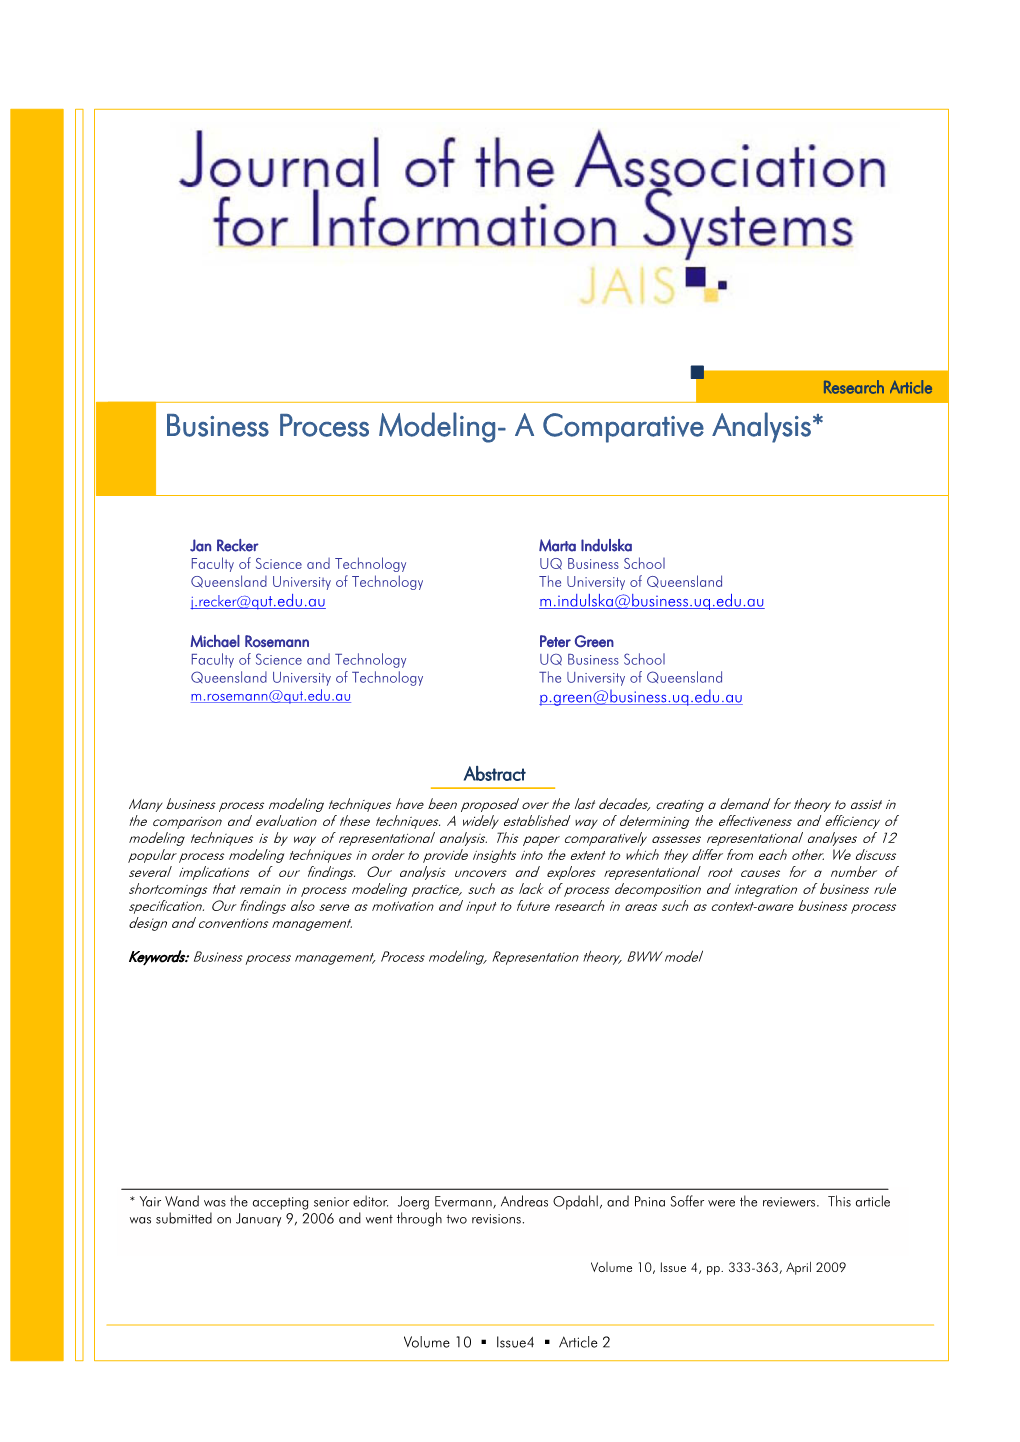 Business Process Modeling- a Comparative Analysis*